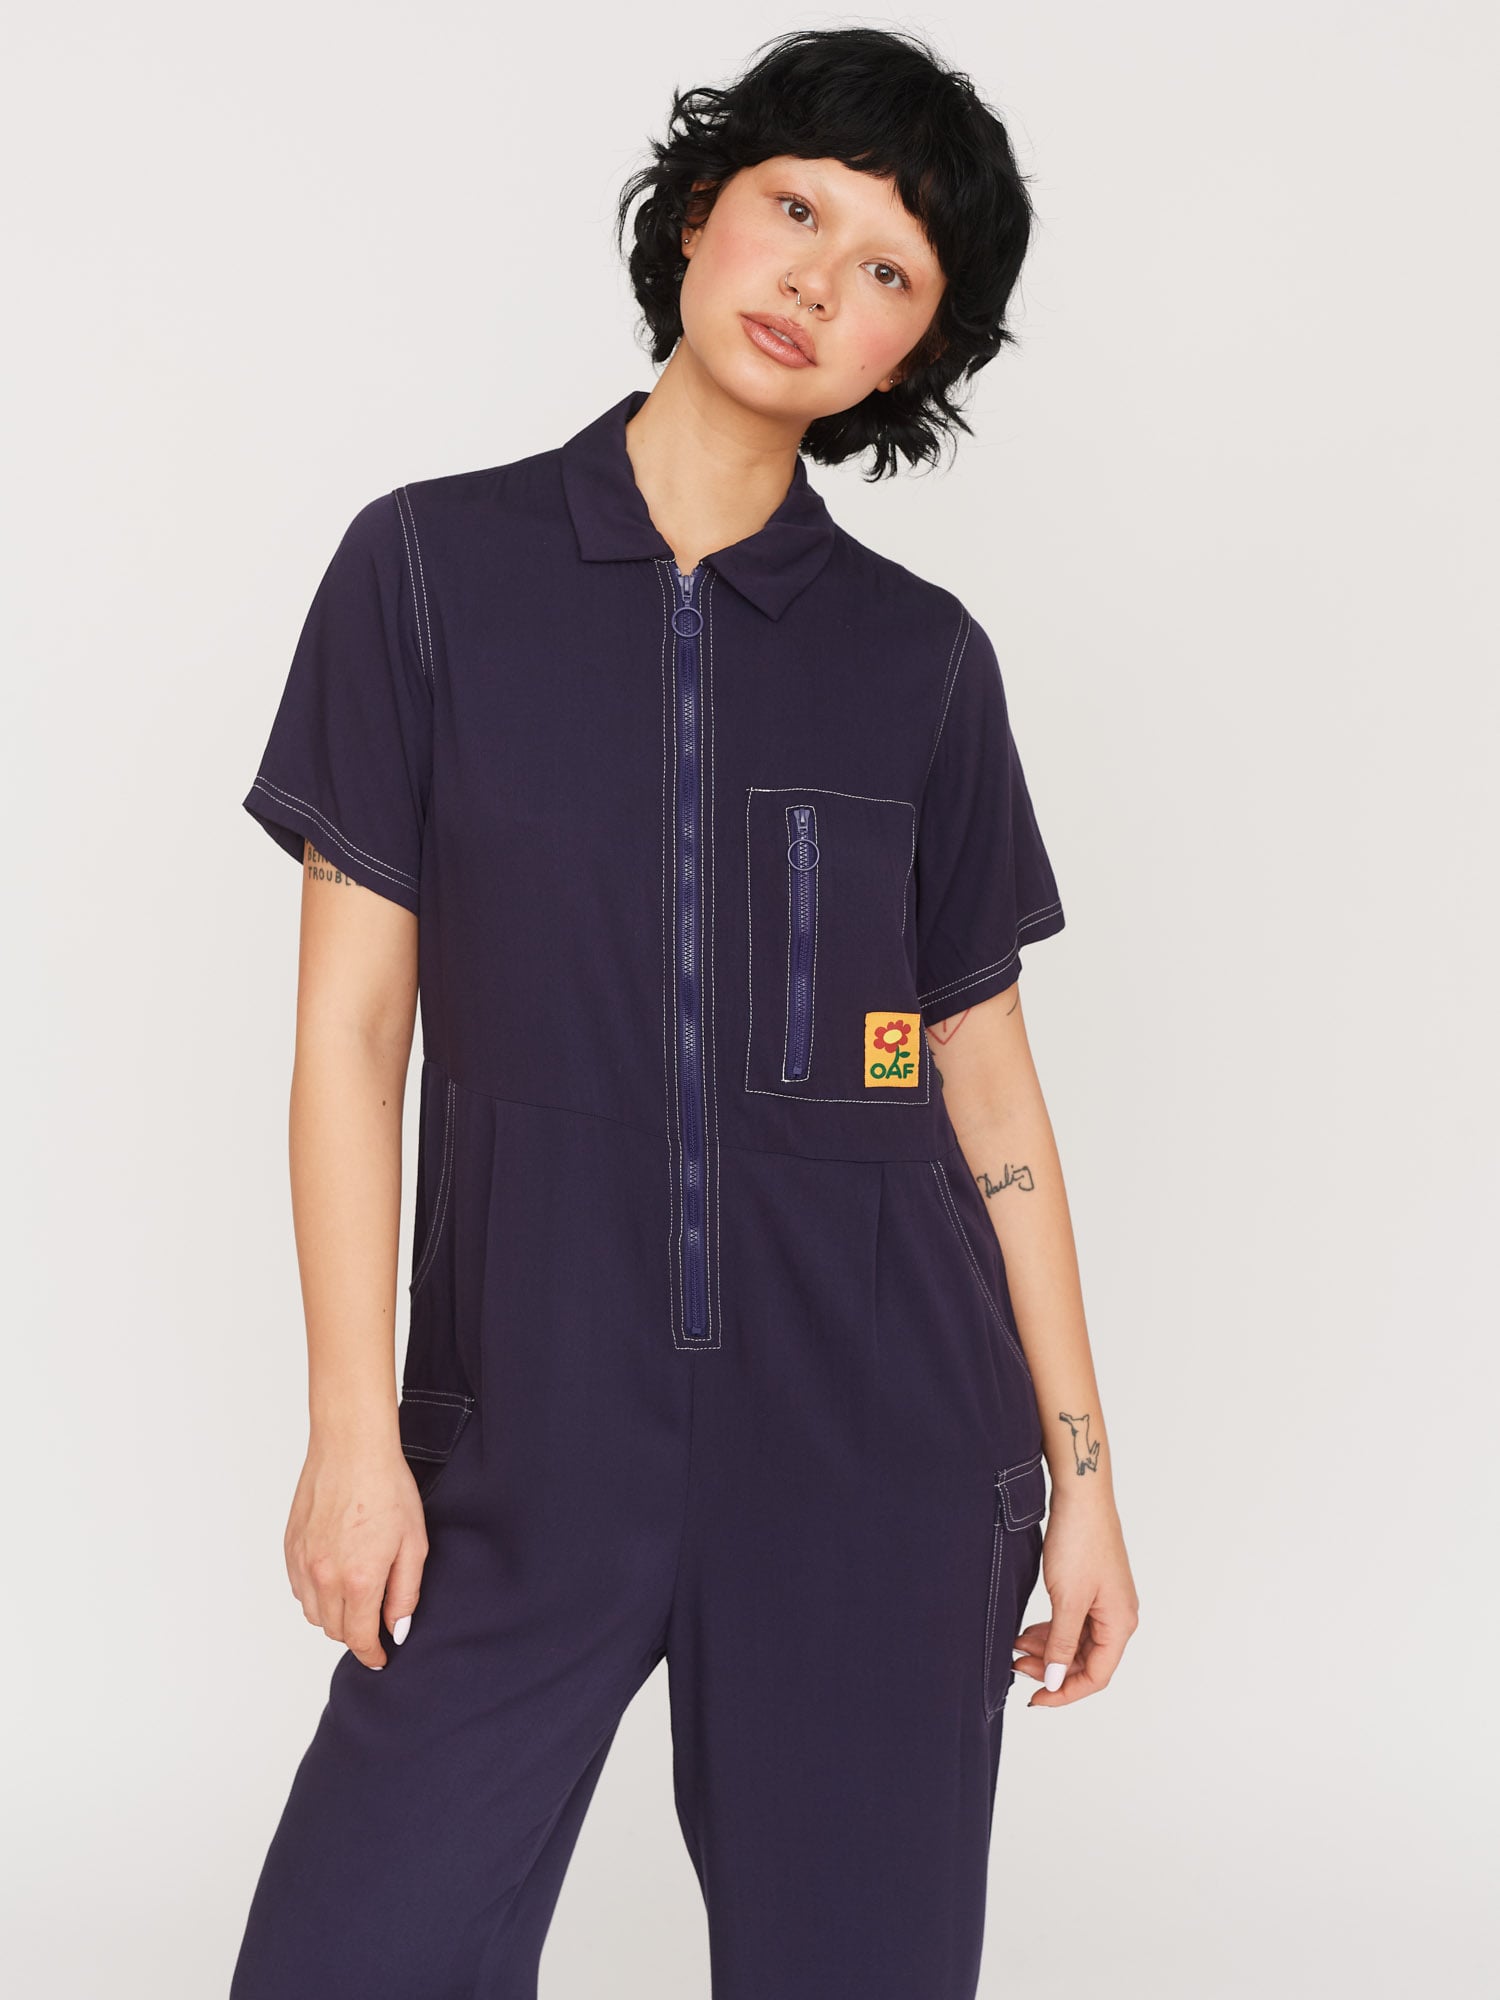 Jumpsuits & Playsuits | Womens Rompers | All In Ones | Lazy Oaf